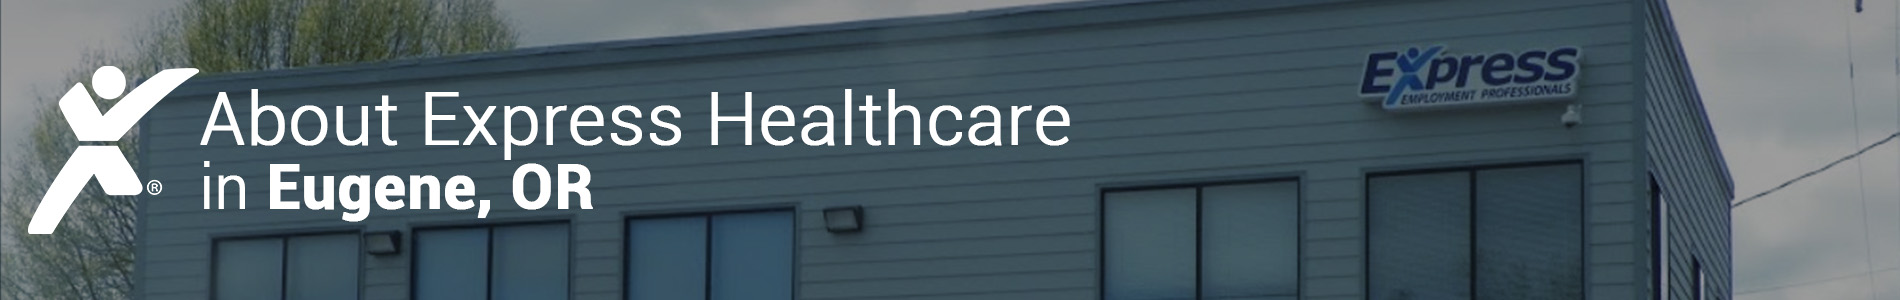 Eugene healthcare jobs - About Express Healthare